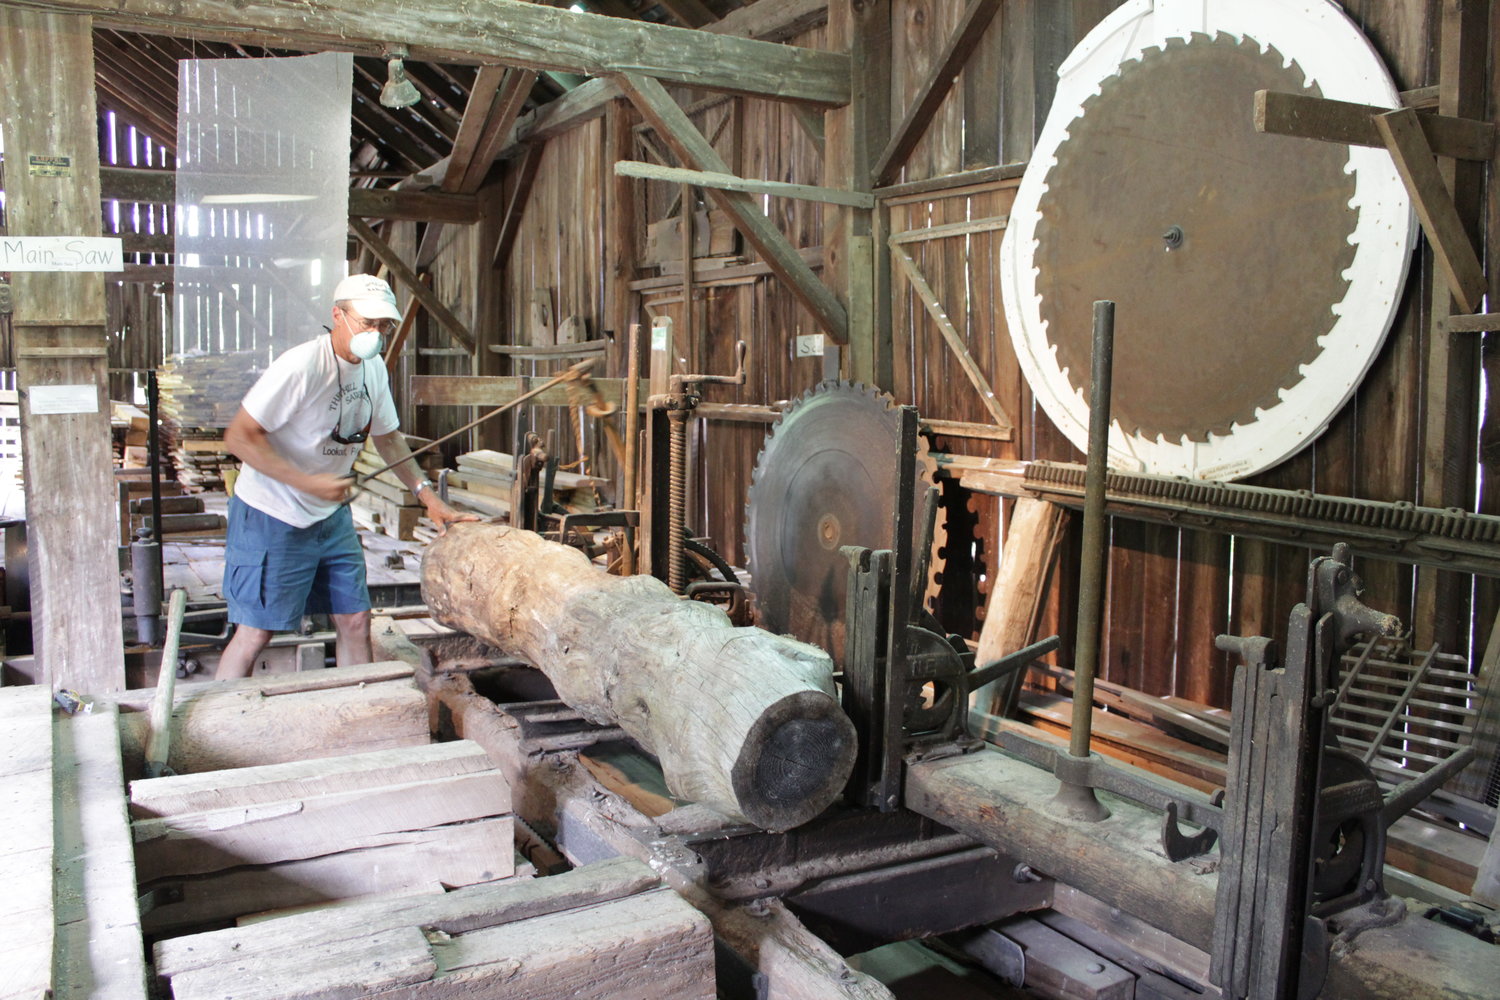 Greg Quaglio, from the Equinunk Historical Society, demonstrates the mill’s operations.